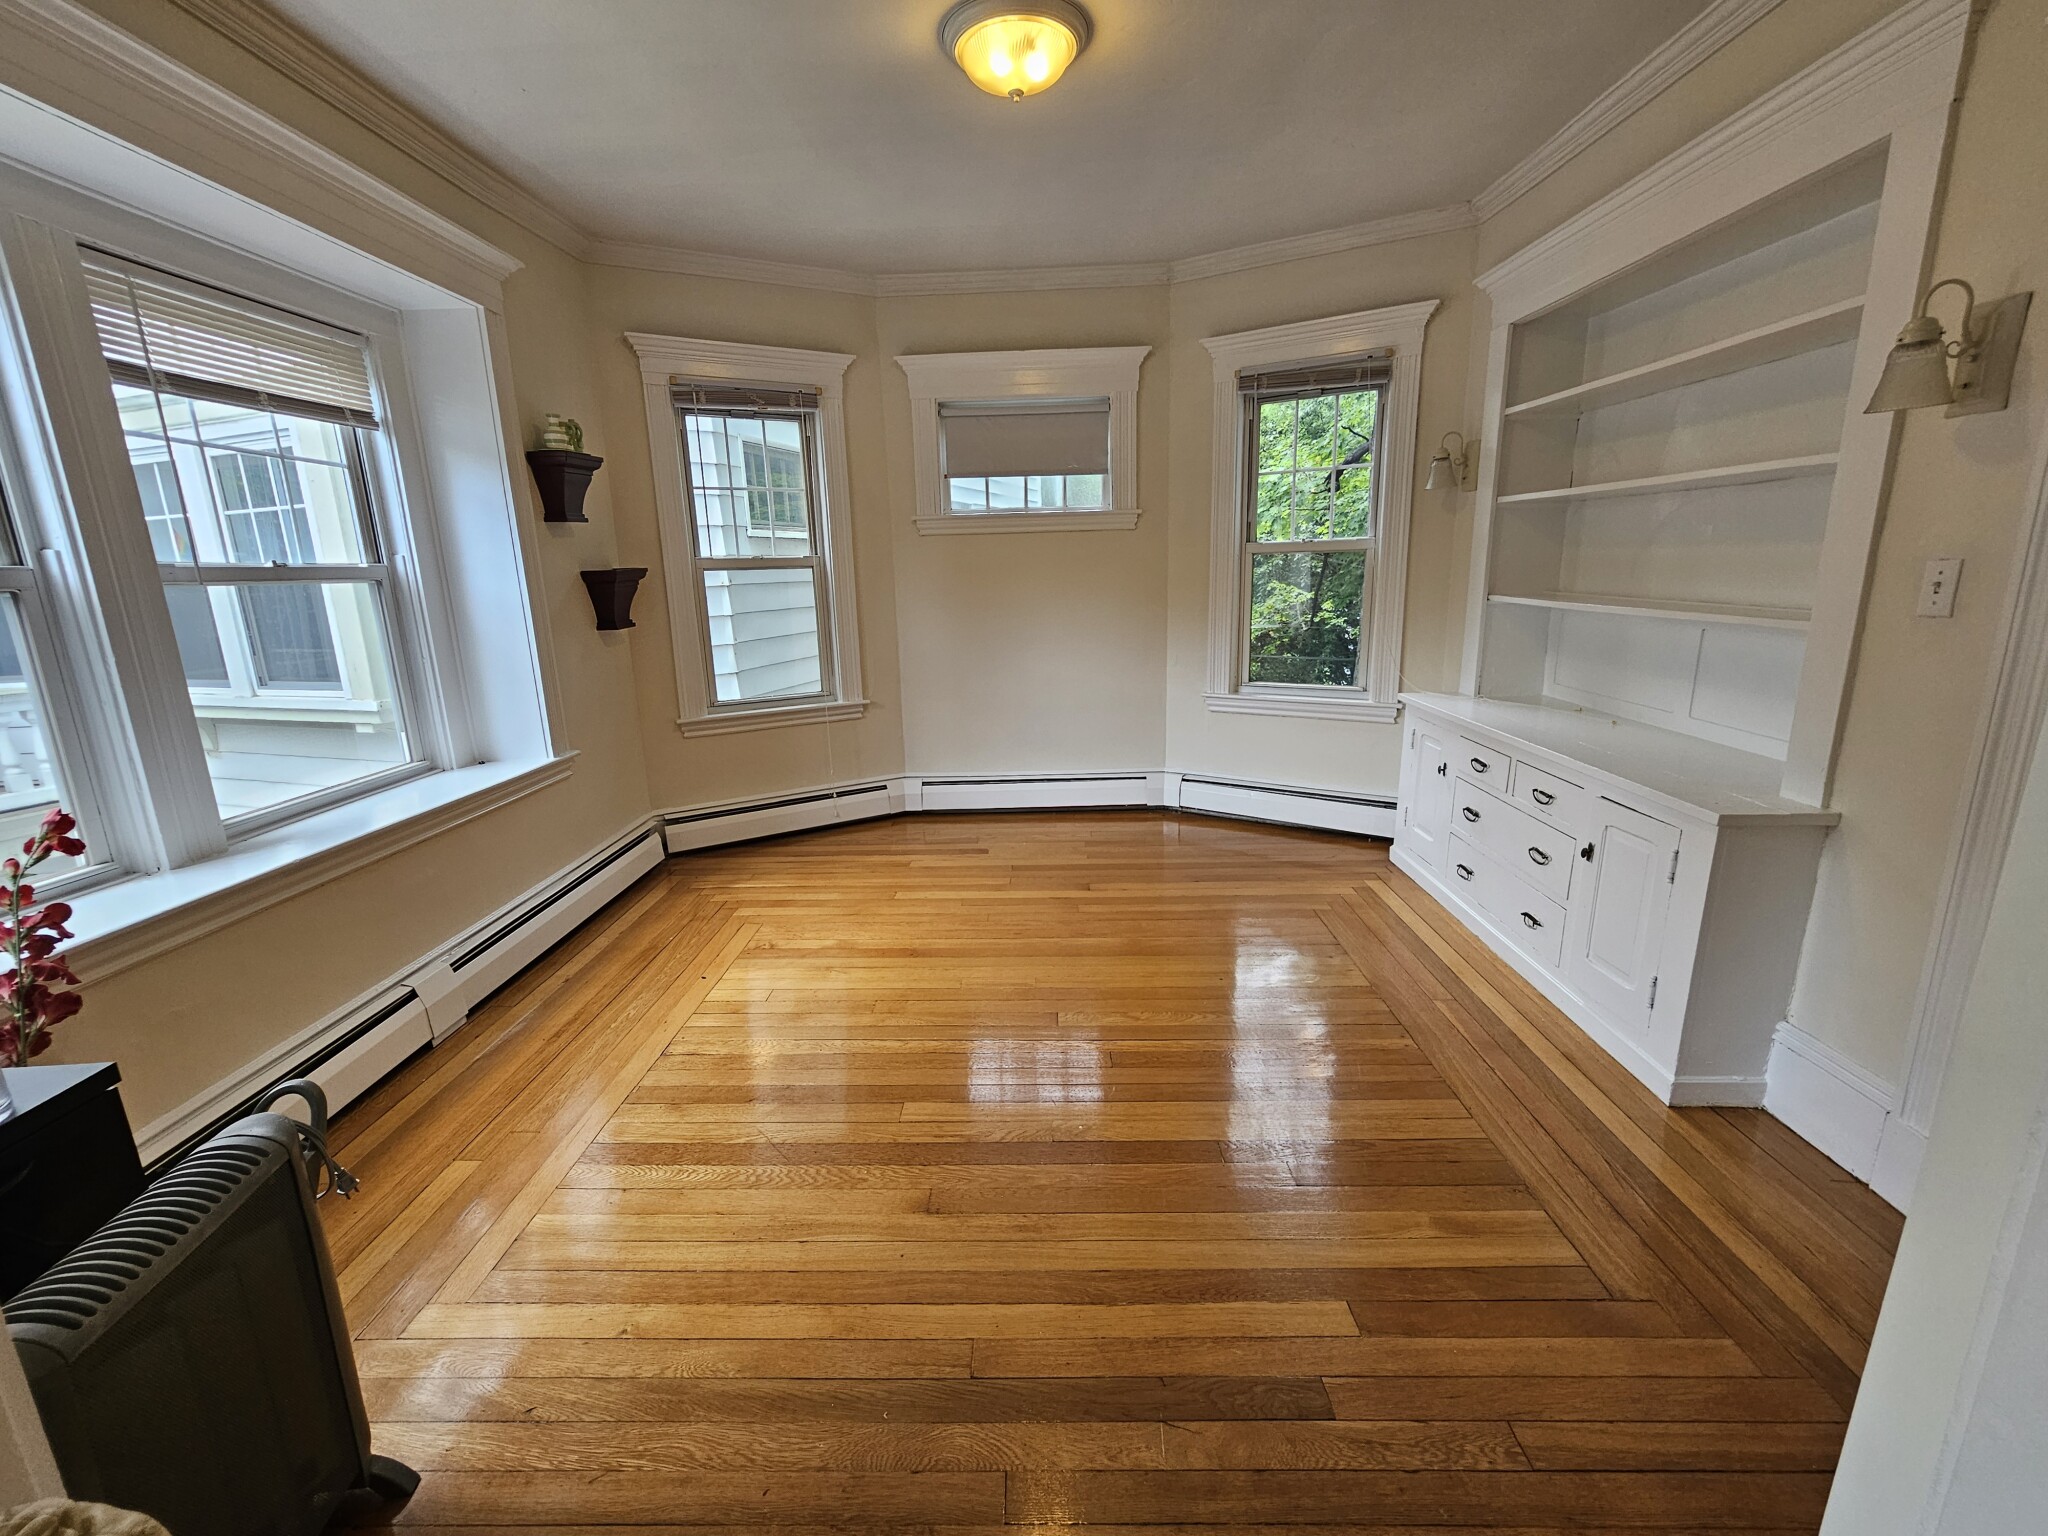 Photos of apartment on Paine Ct.,Brookline MA 02467